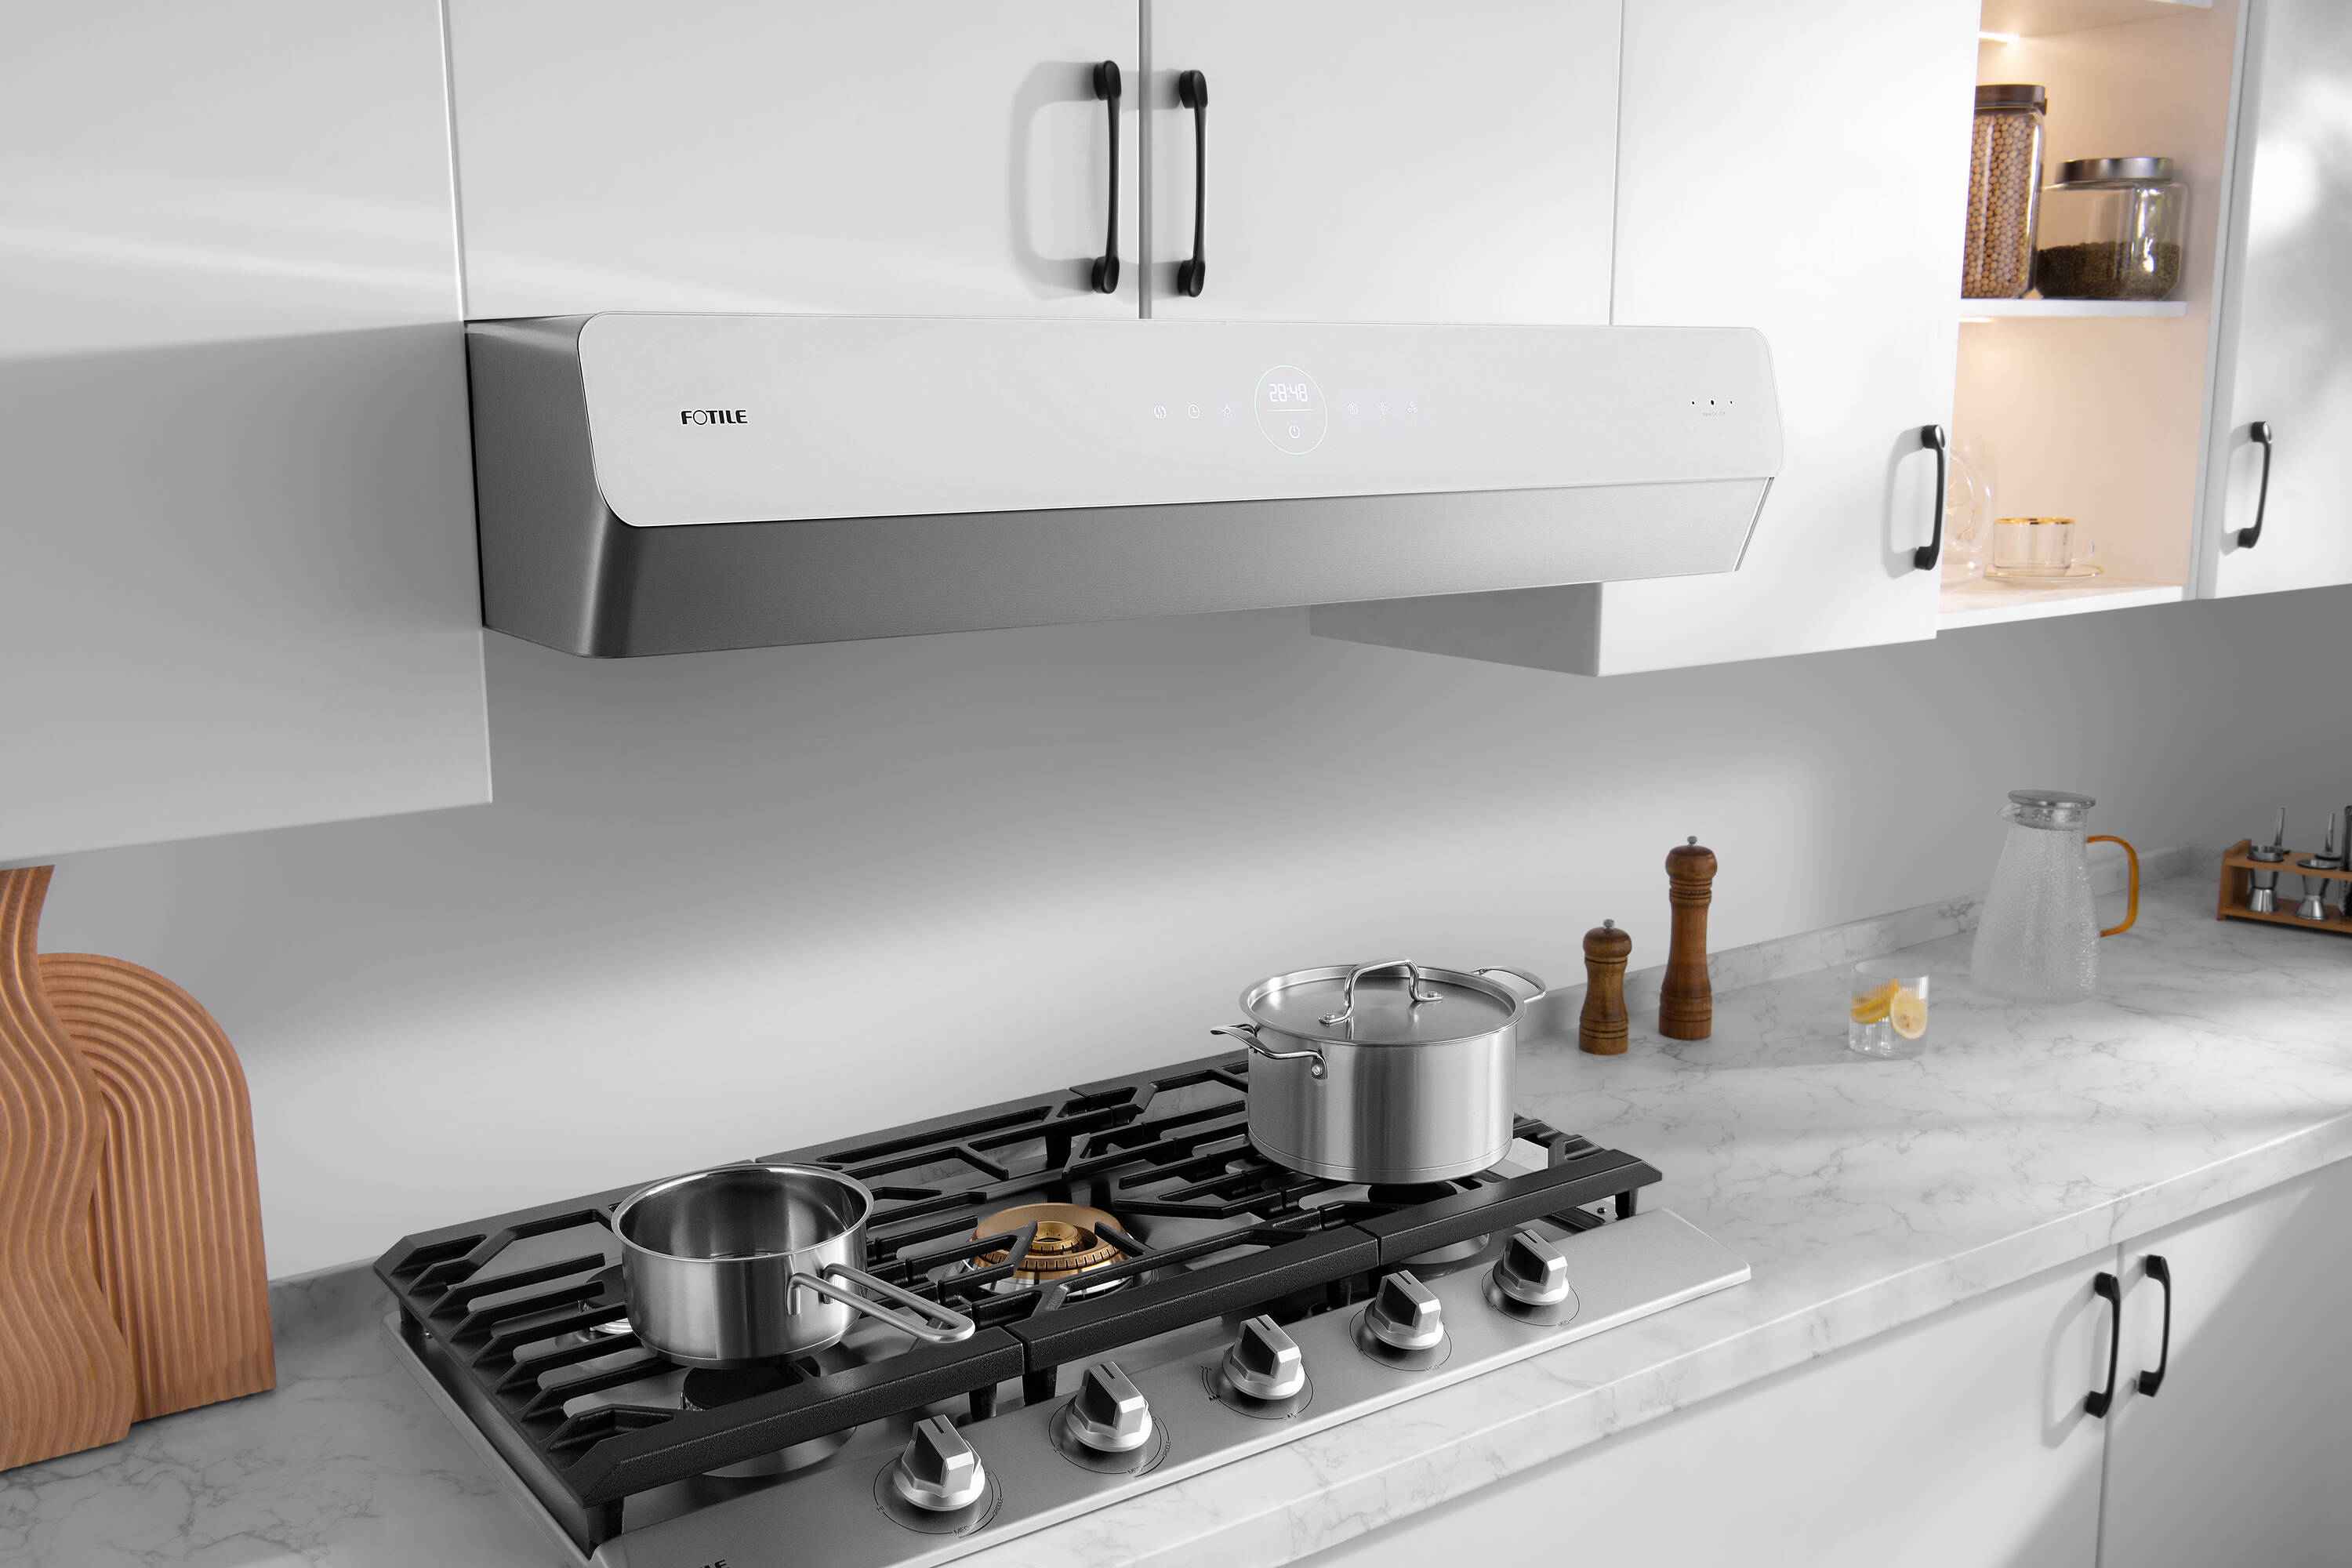 A smart kitchen goes well with smart gadgets!, A smart kitchen goes well  with smart gadgets!, By Lilyon